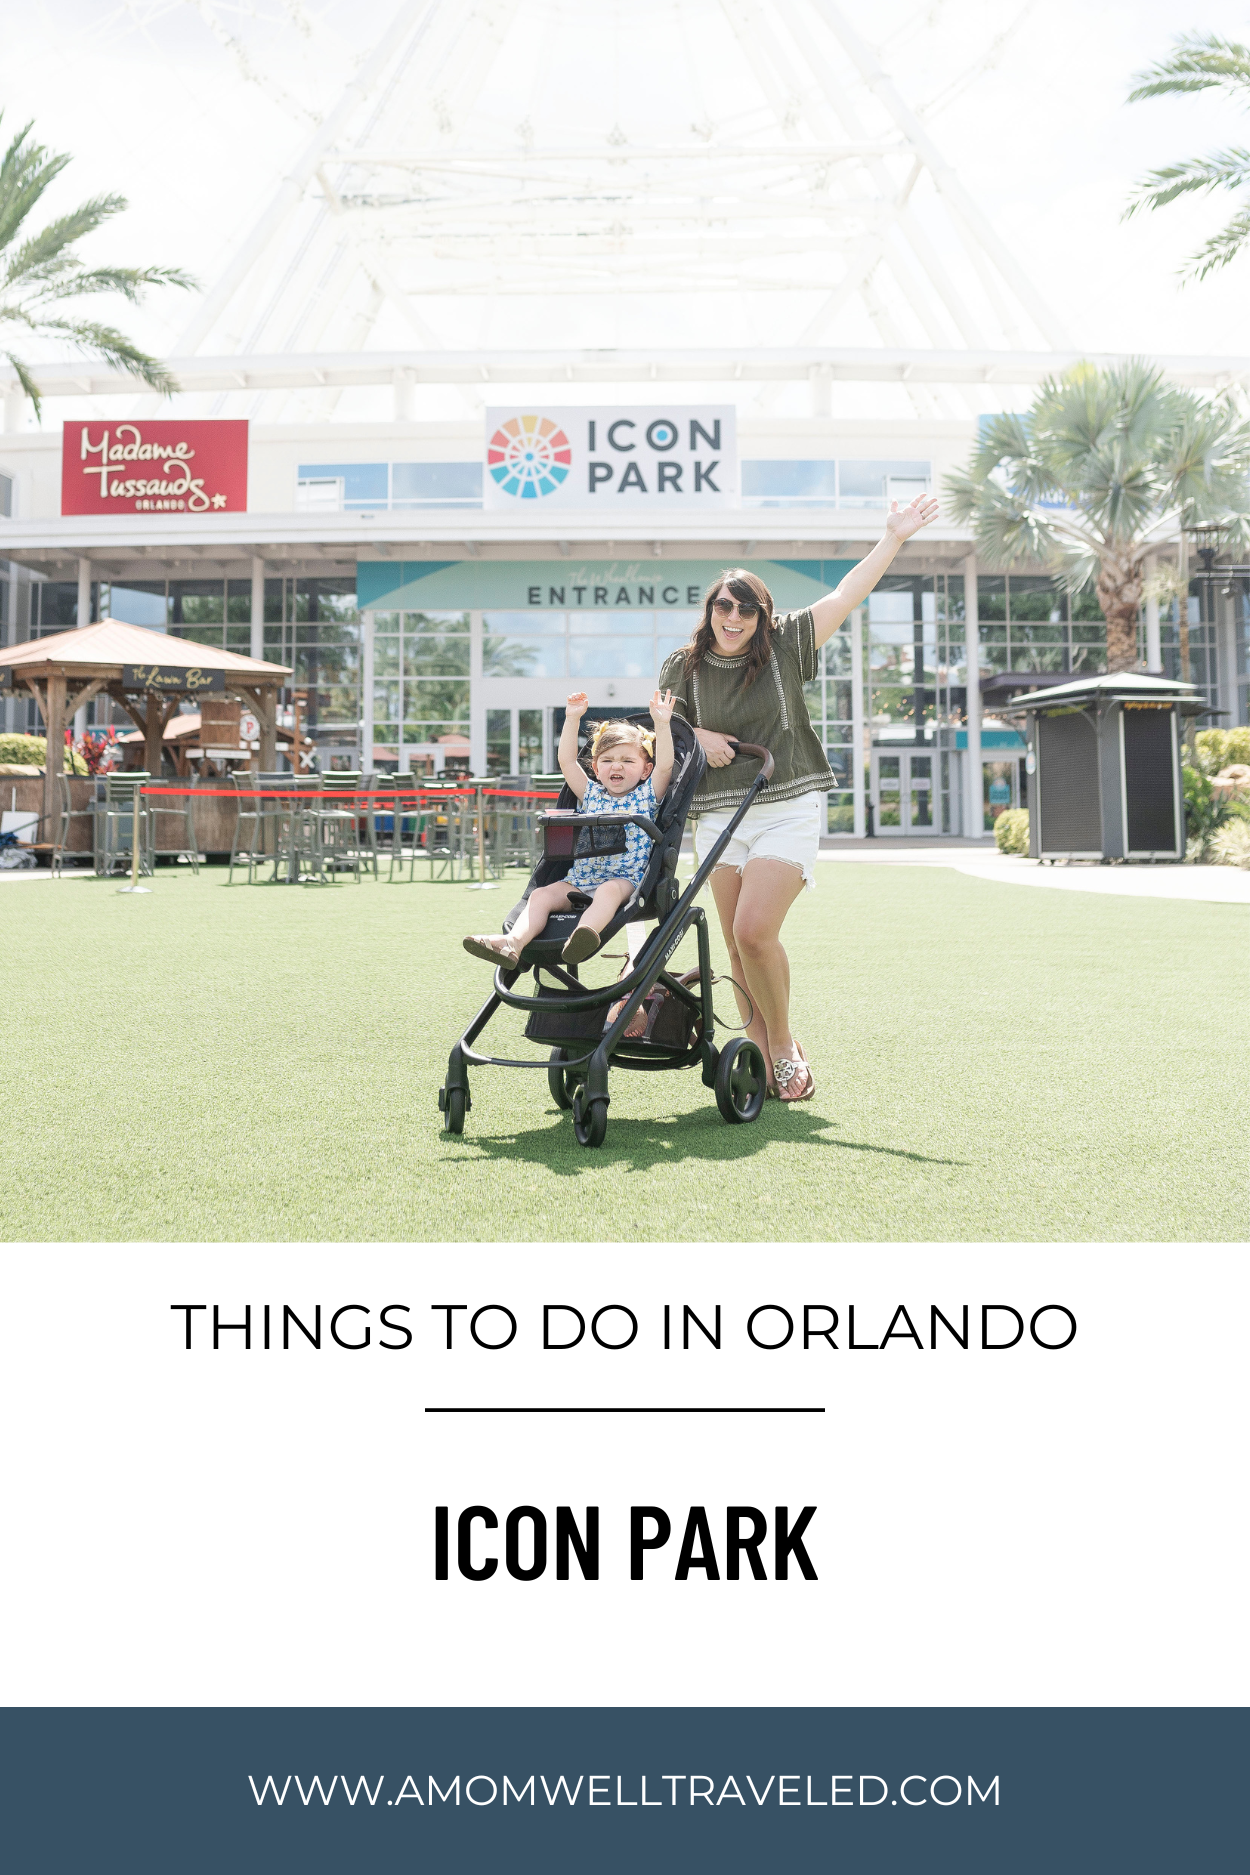 Things to do in Orlando, ICON park 